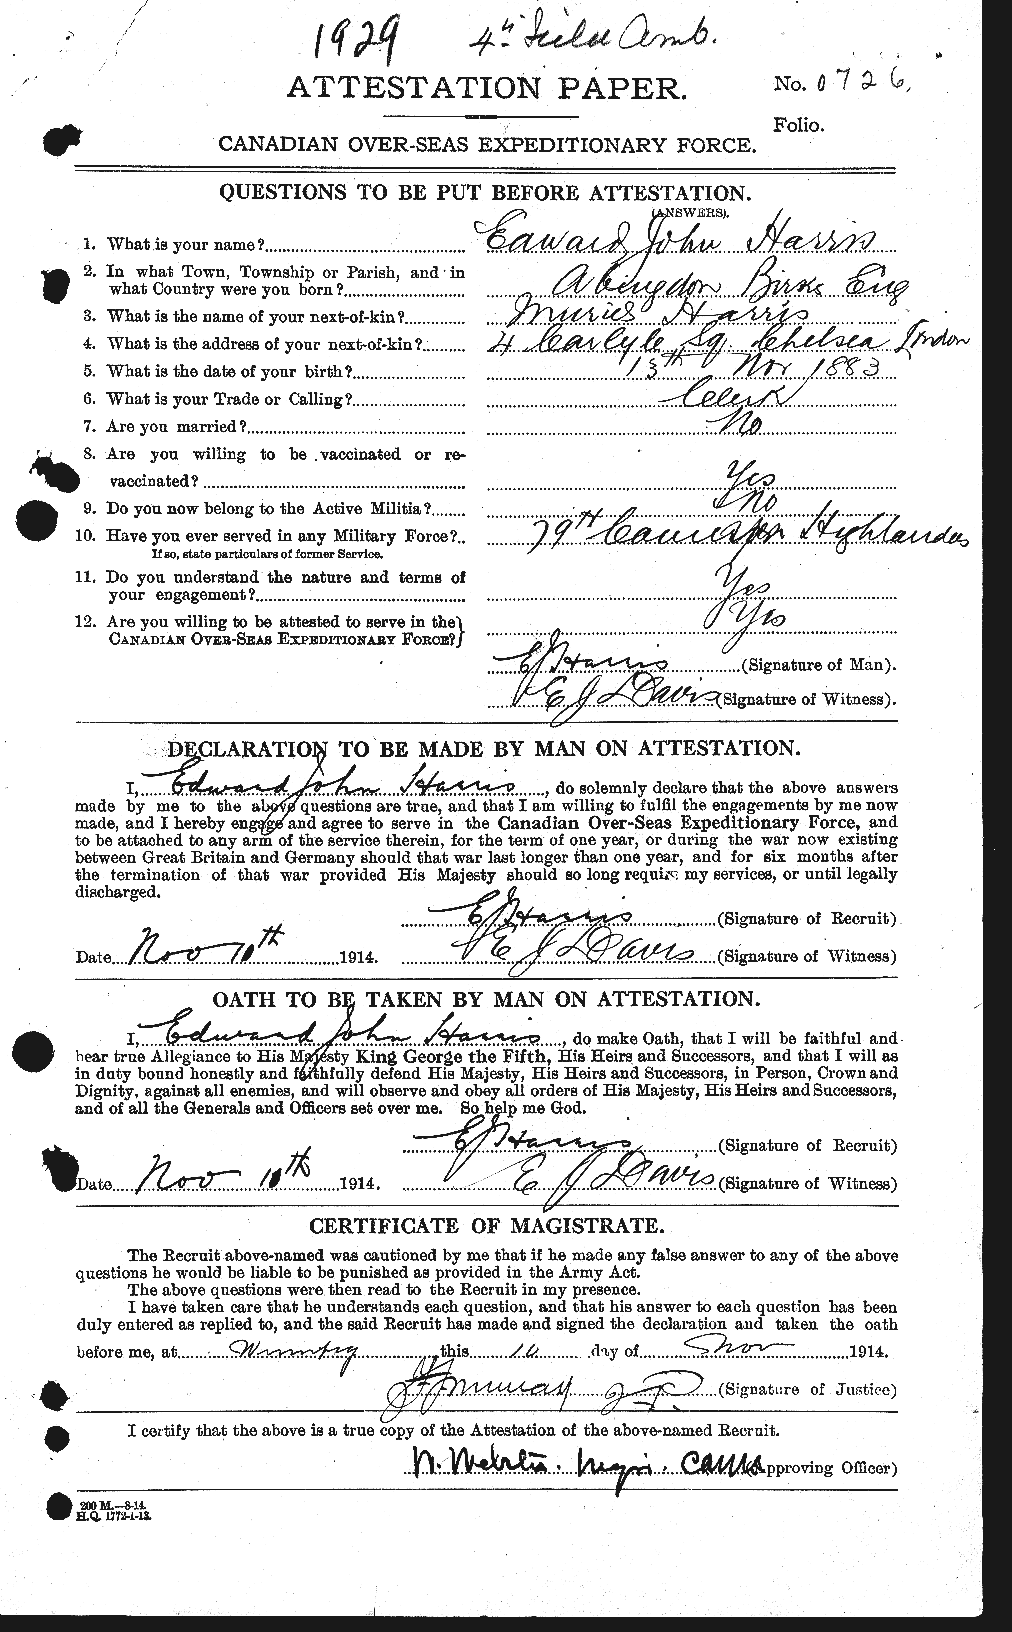 Personnel Records of the First World War - CEF 379275a